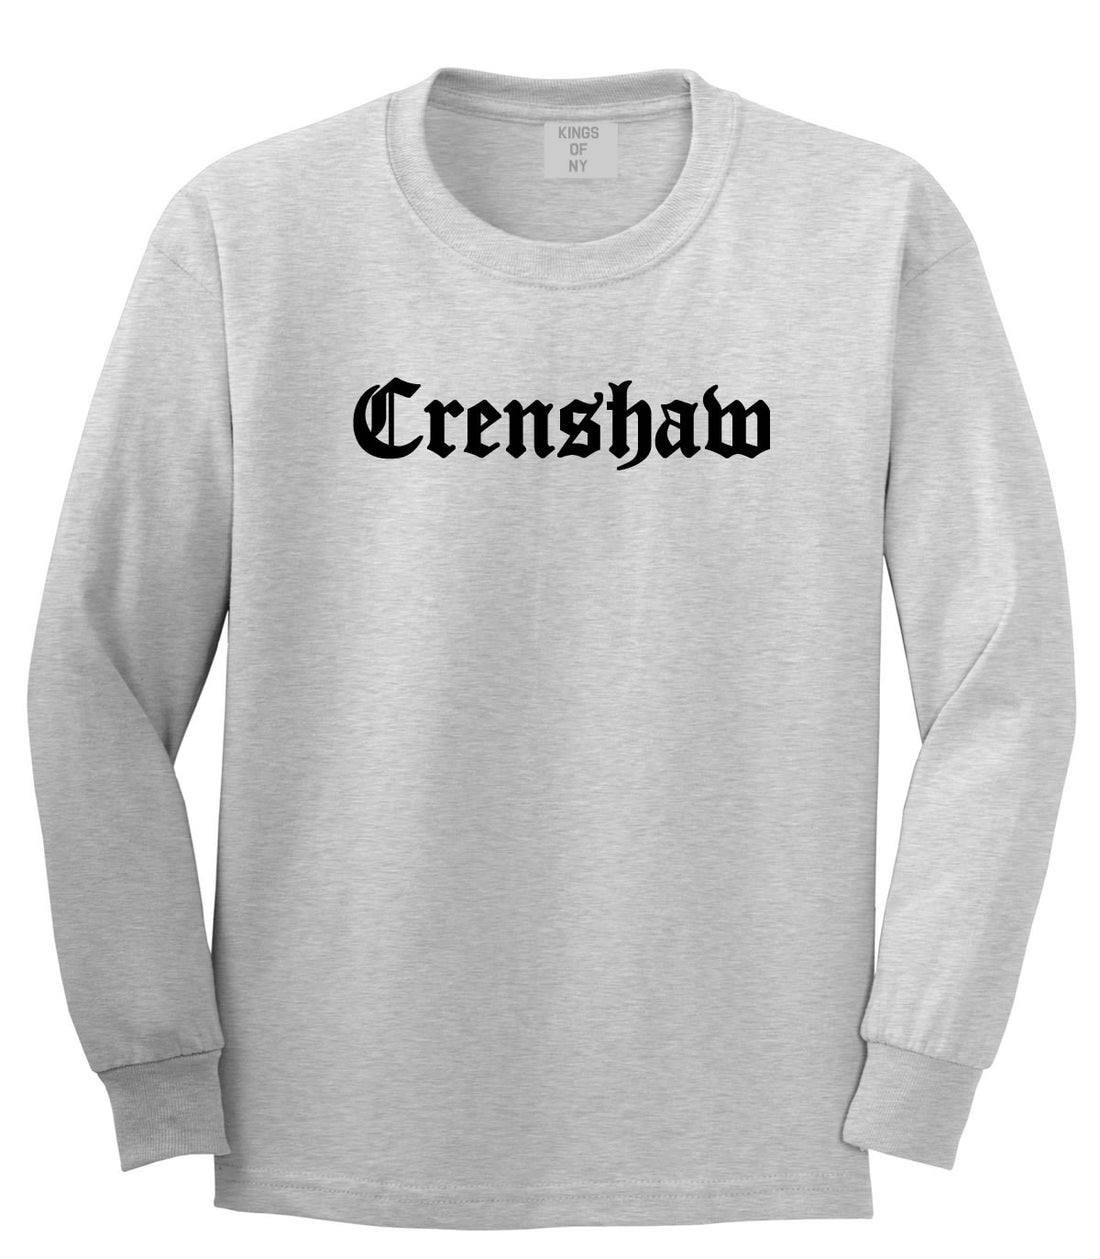 Crenshaw Old English California Long Sleeve T-Shirt in Grey By Kings Of NY